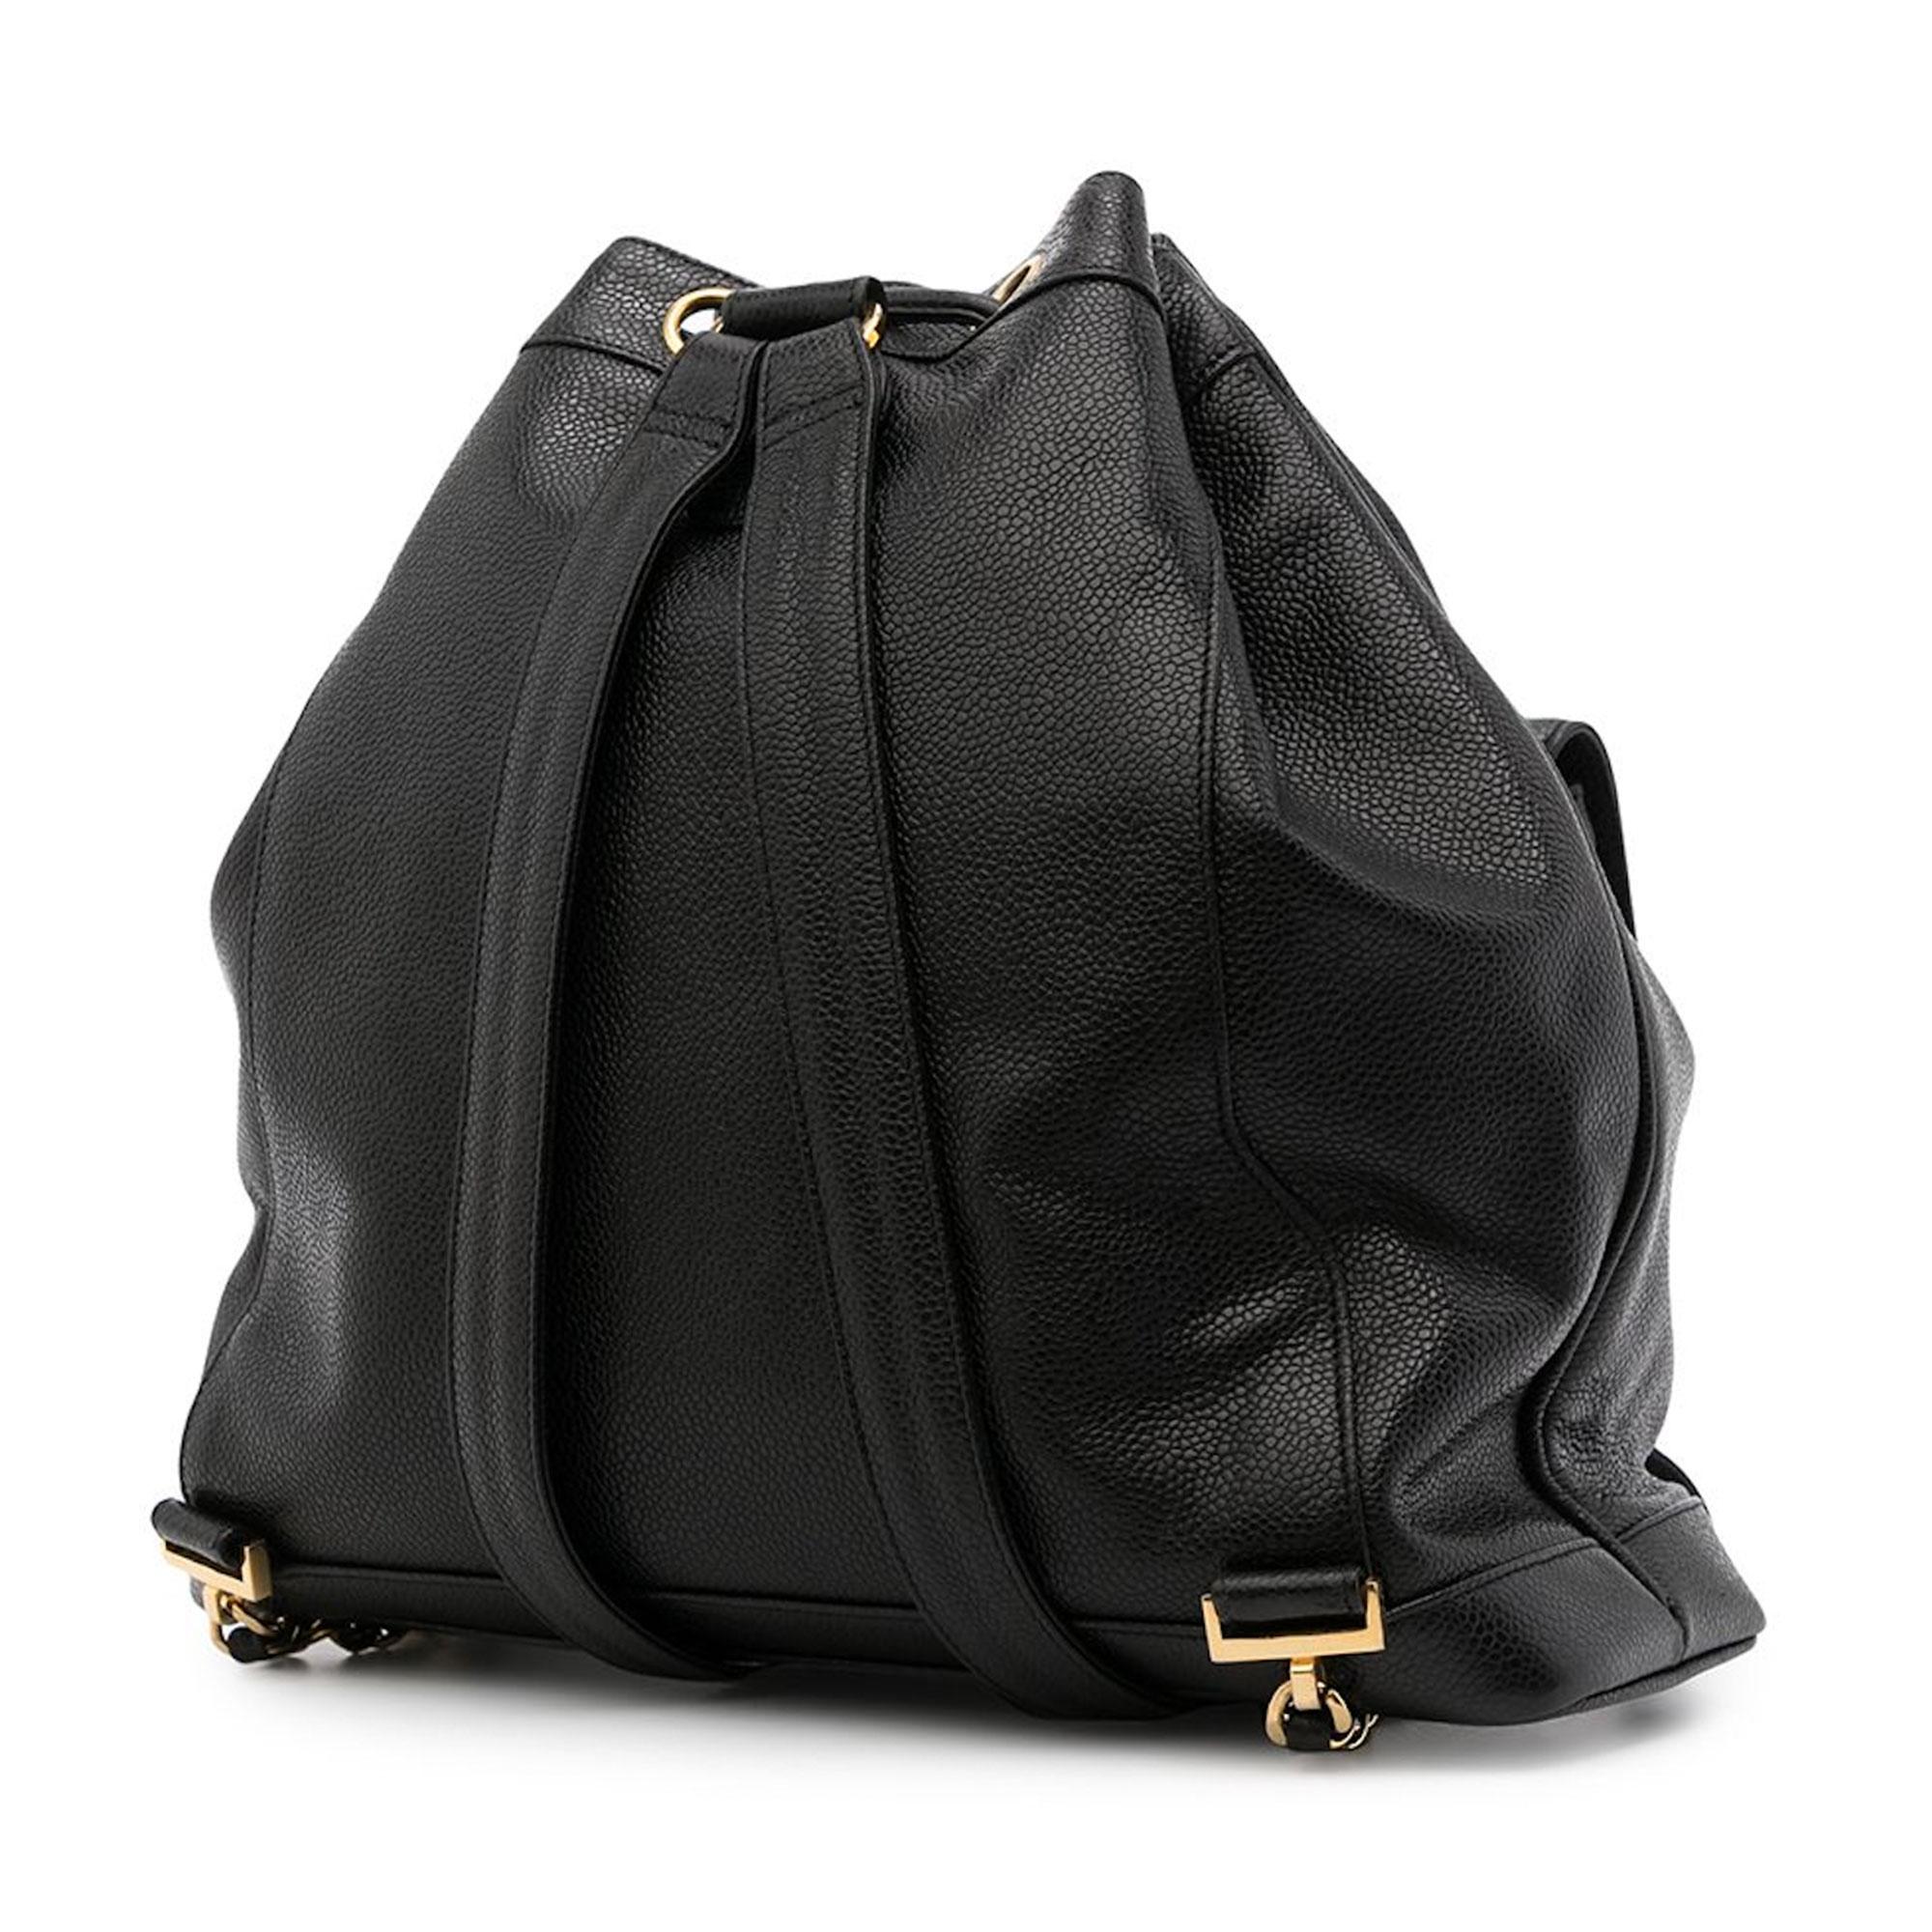 Classic Chanel caviar black backpack with front pocket and classic CC closure

1995 {VINTAGE 28 Years}
Gold hardware
Drawstring closure
Interior lambskin lining
Interior caviar zippered pouch
Flat bottom
Leather backpack straps with interwoven